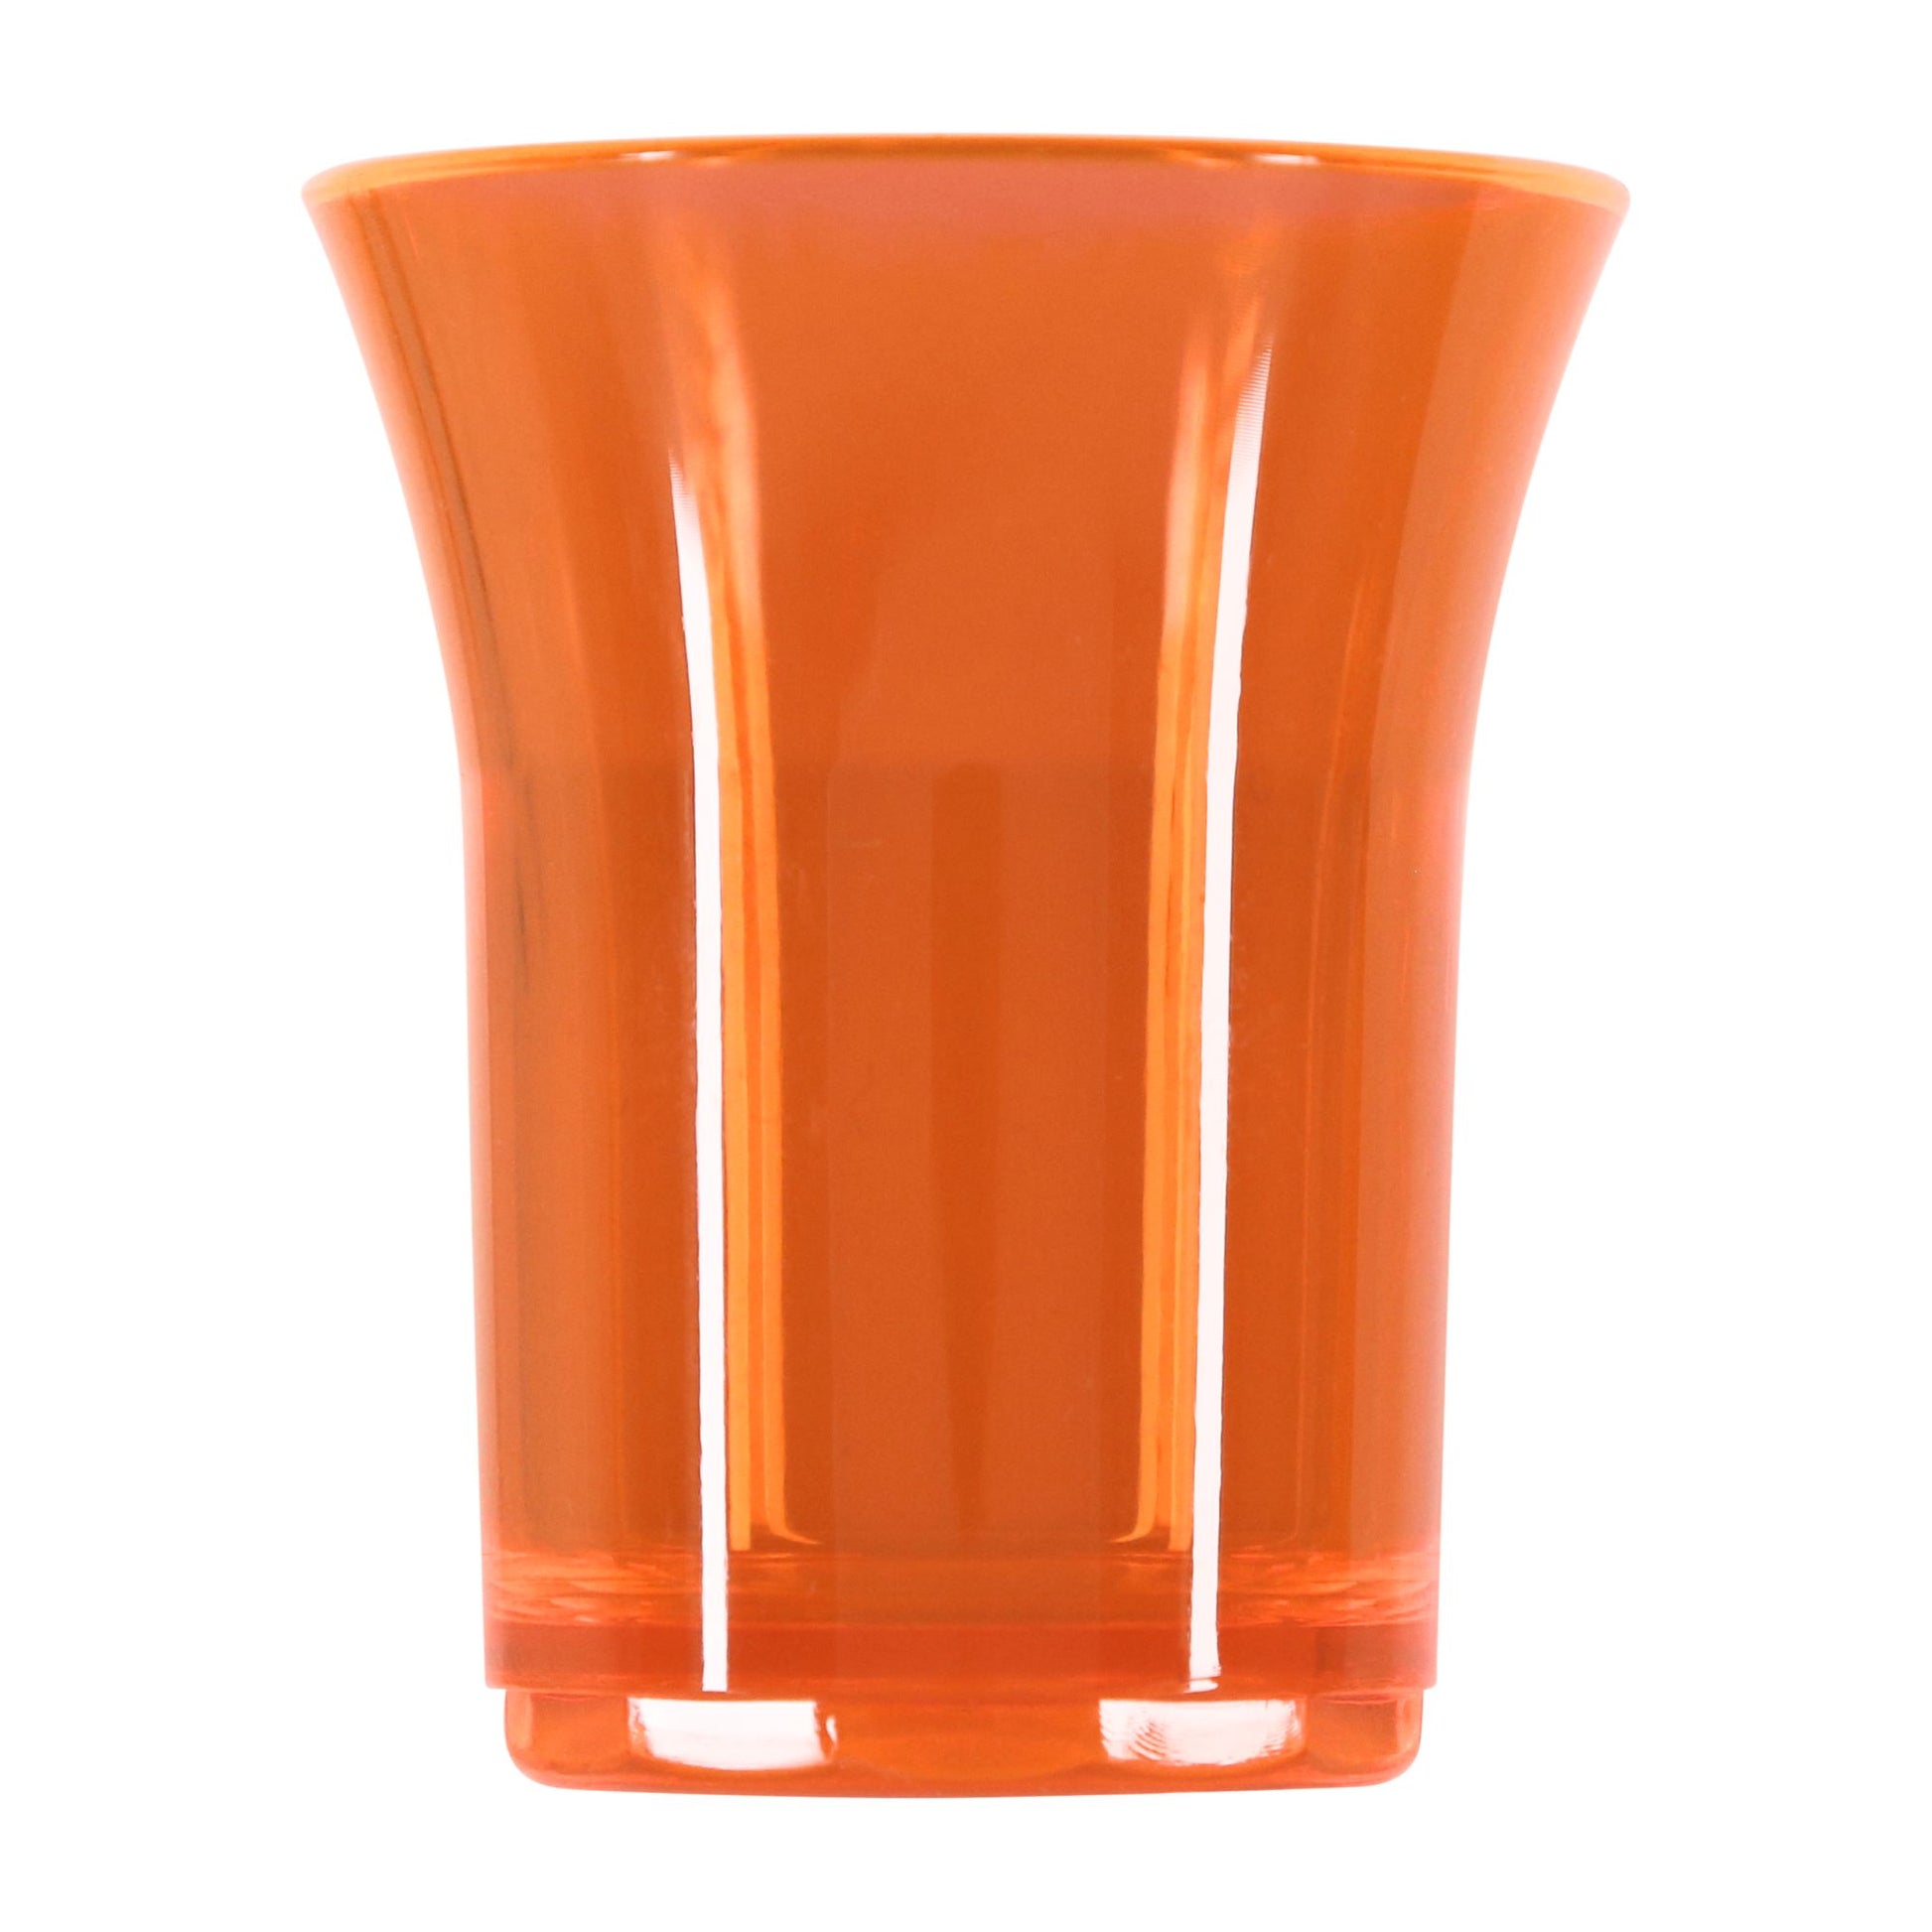 20 x Neon Shot Glasses Heavy Duty Strong Reusable Plastic 25ml Glossy Liquor, Spirits, Food Sampling, Parties, BBQs, Pubs, Clubs, Jelly-5056020182931-PCUP-SHOT-NEON-Product Pro-25ml, Neon, Neon Shot Glasses, Plastic Shot Glasses, Reusable Shot Glasses, Shot Glasses, Shots